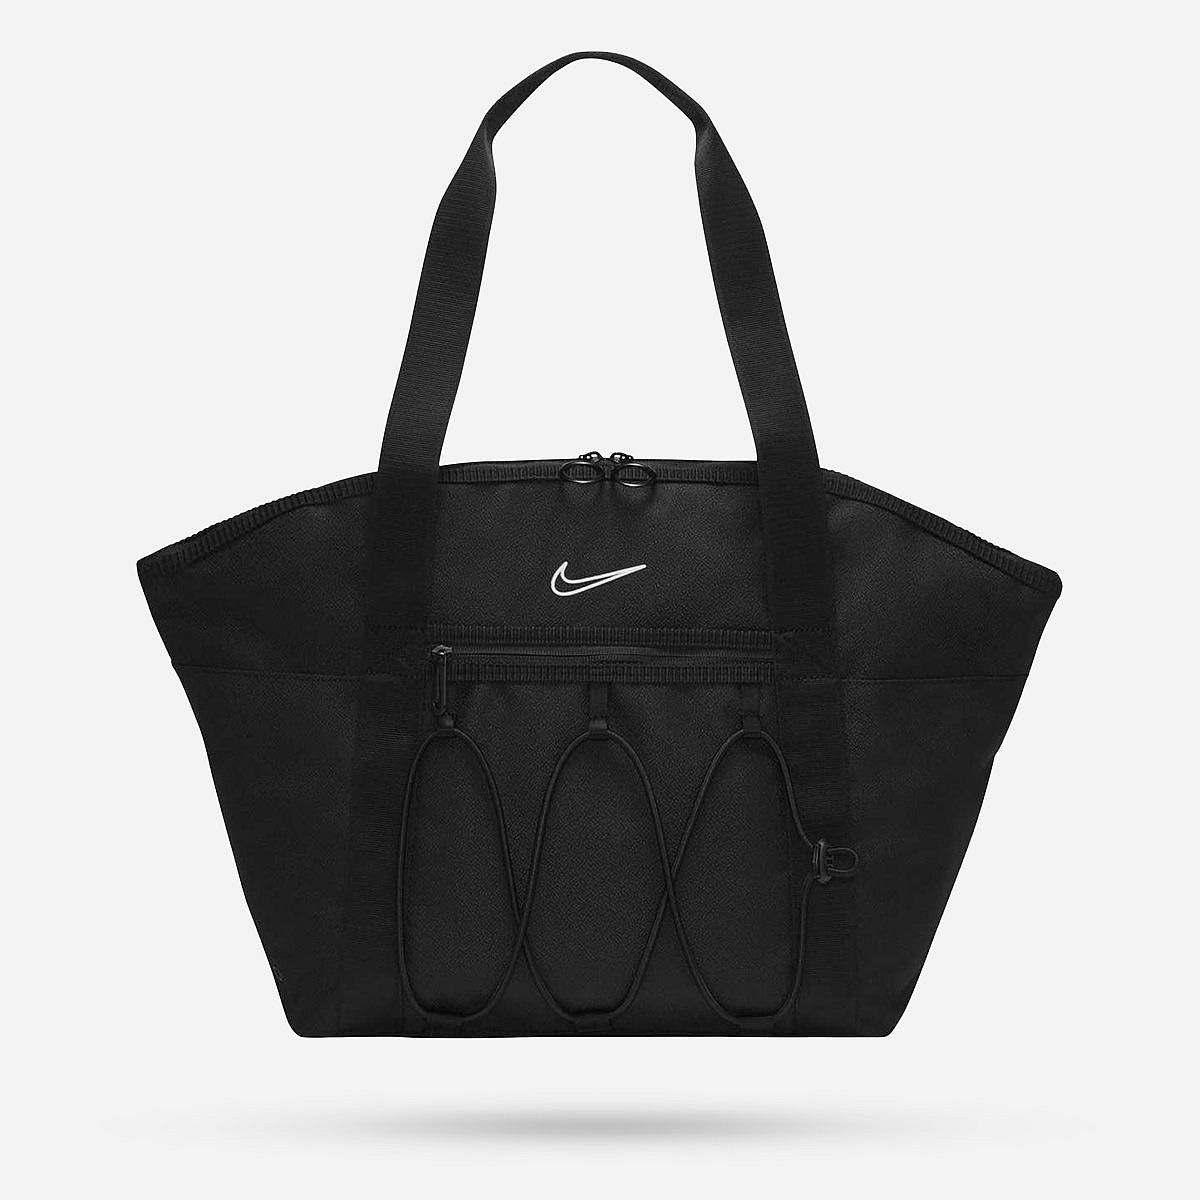 AN264448 One Women's Training Tote Bag